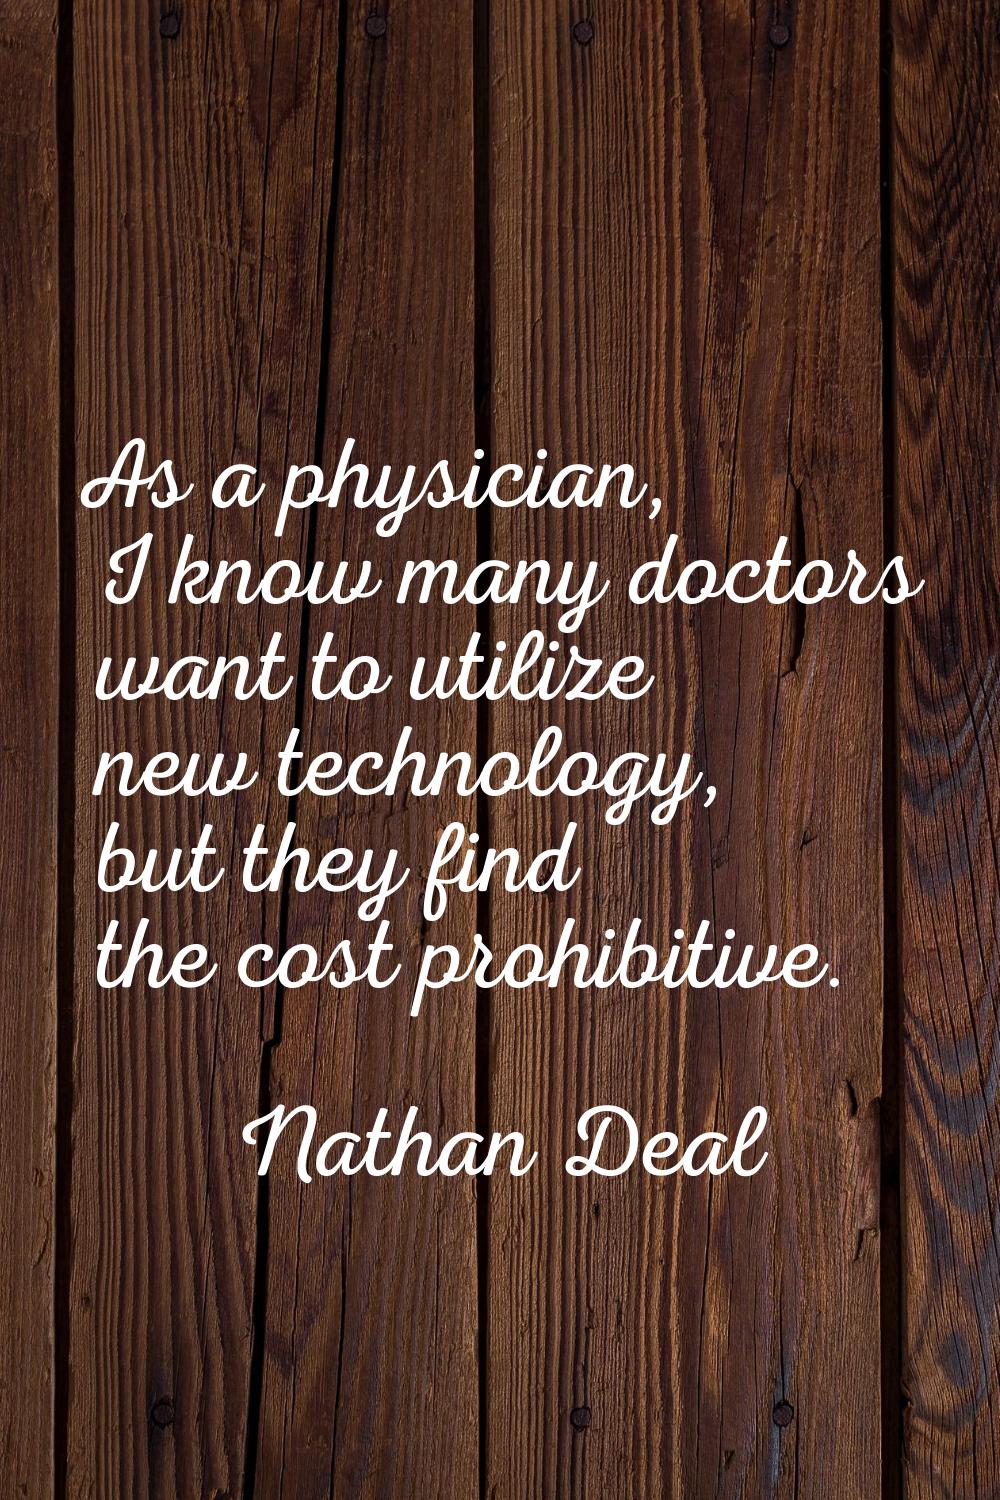 As a physician, I know many doctors want to utilize new technology, but they find the cost prohibit